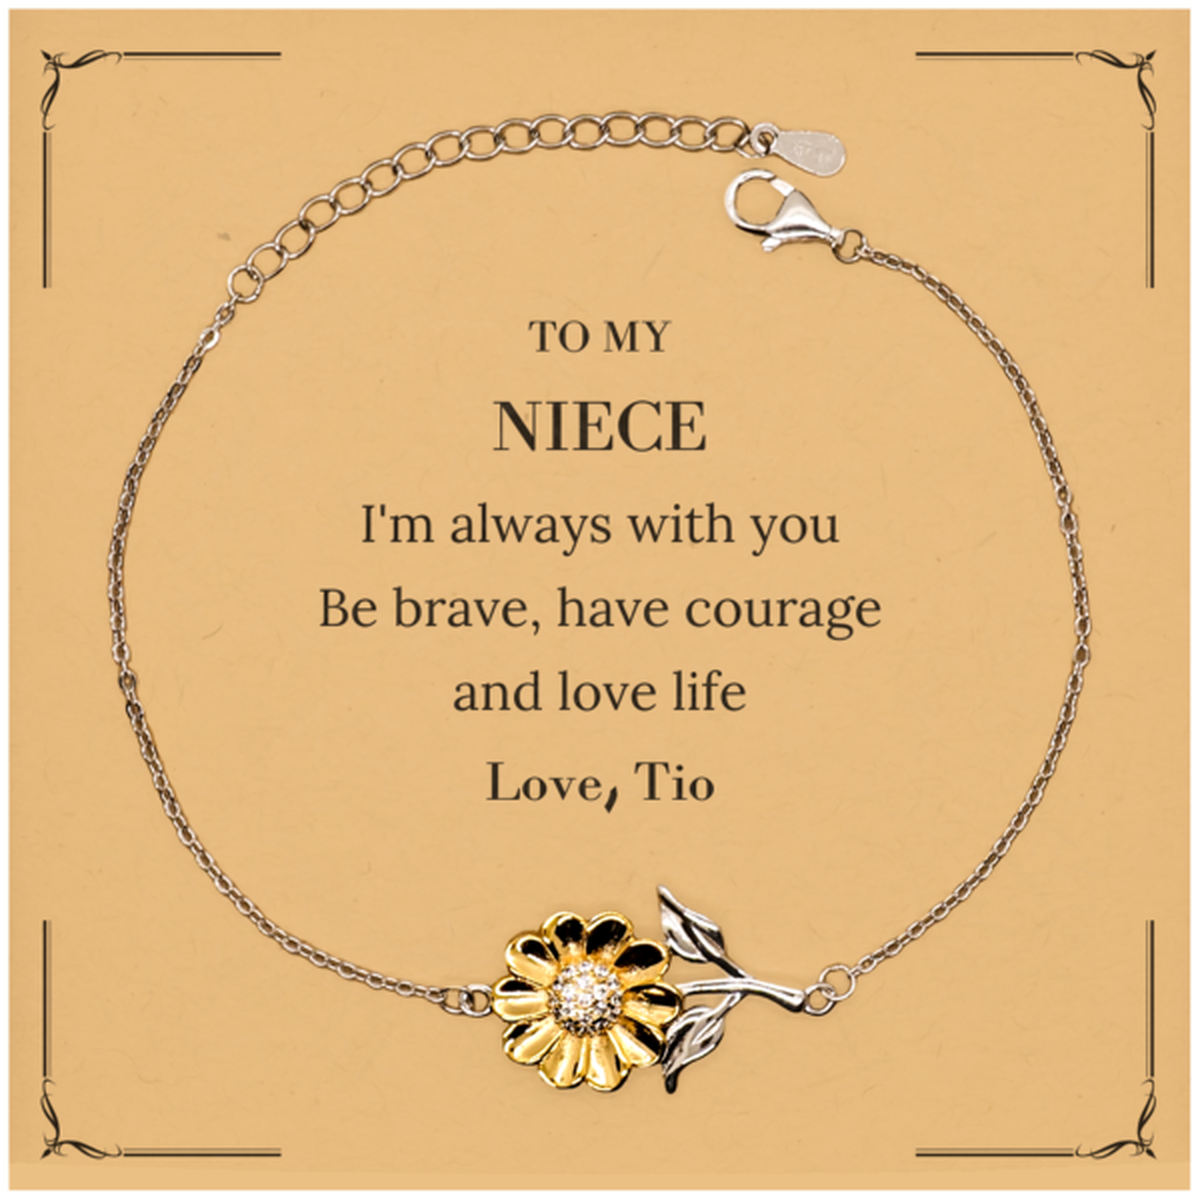 To My Niece Gifts from Tio, Unique Sunflower Bracelet Inspirational Christmas Birthday Graduation Gifts for Niece I'm always with you. Be brave, have courage and love life. Love, Tio